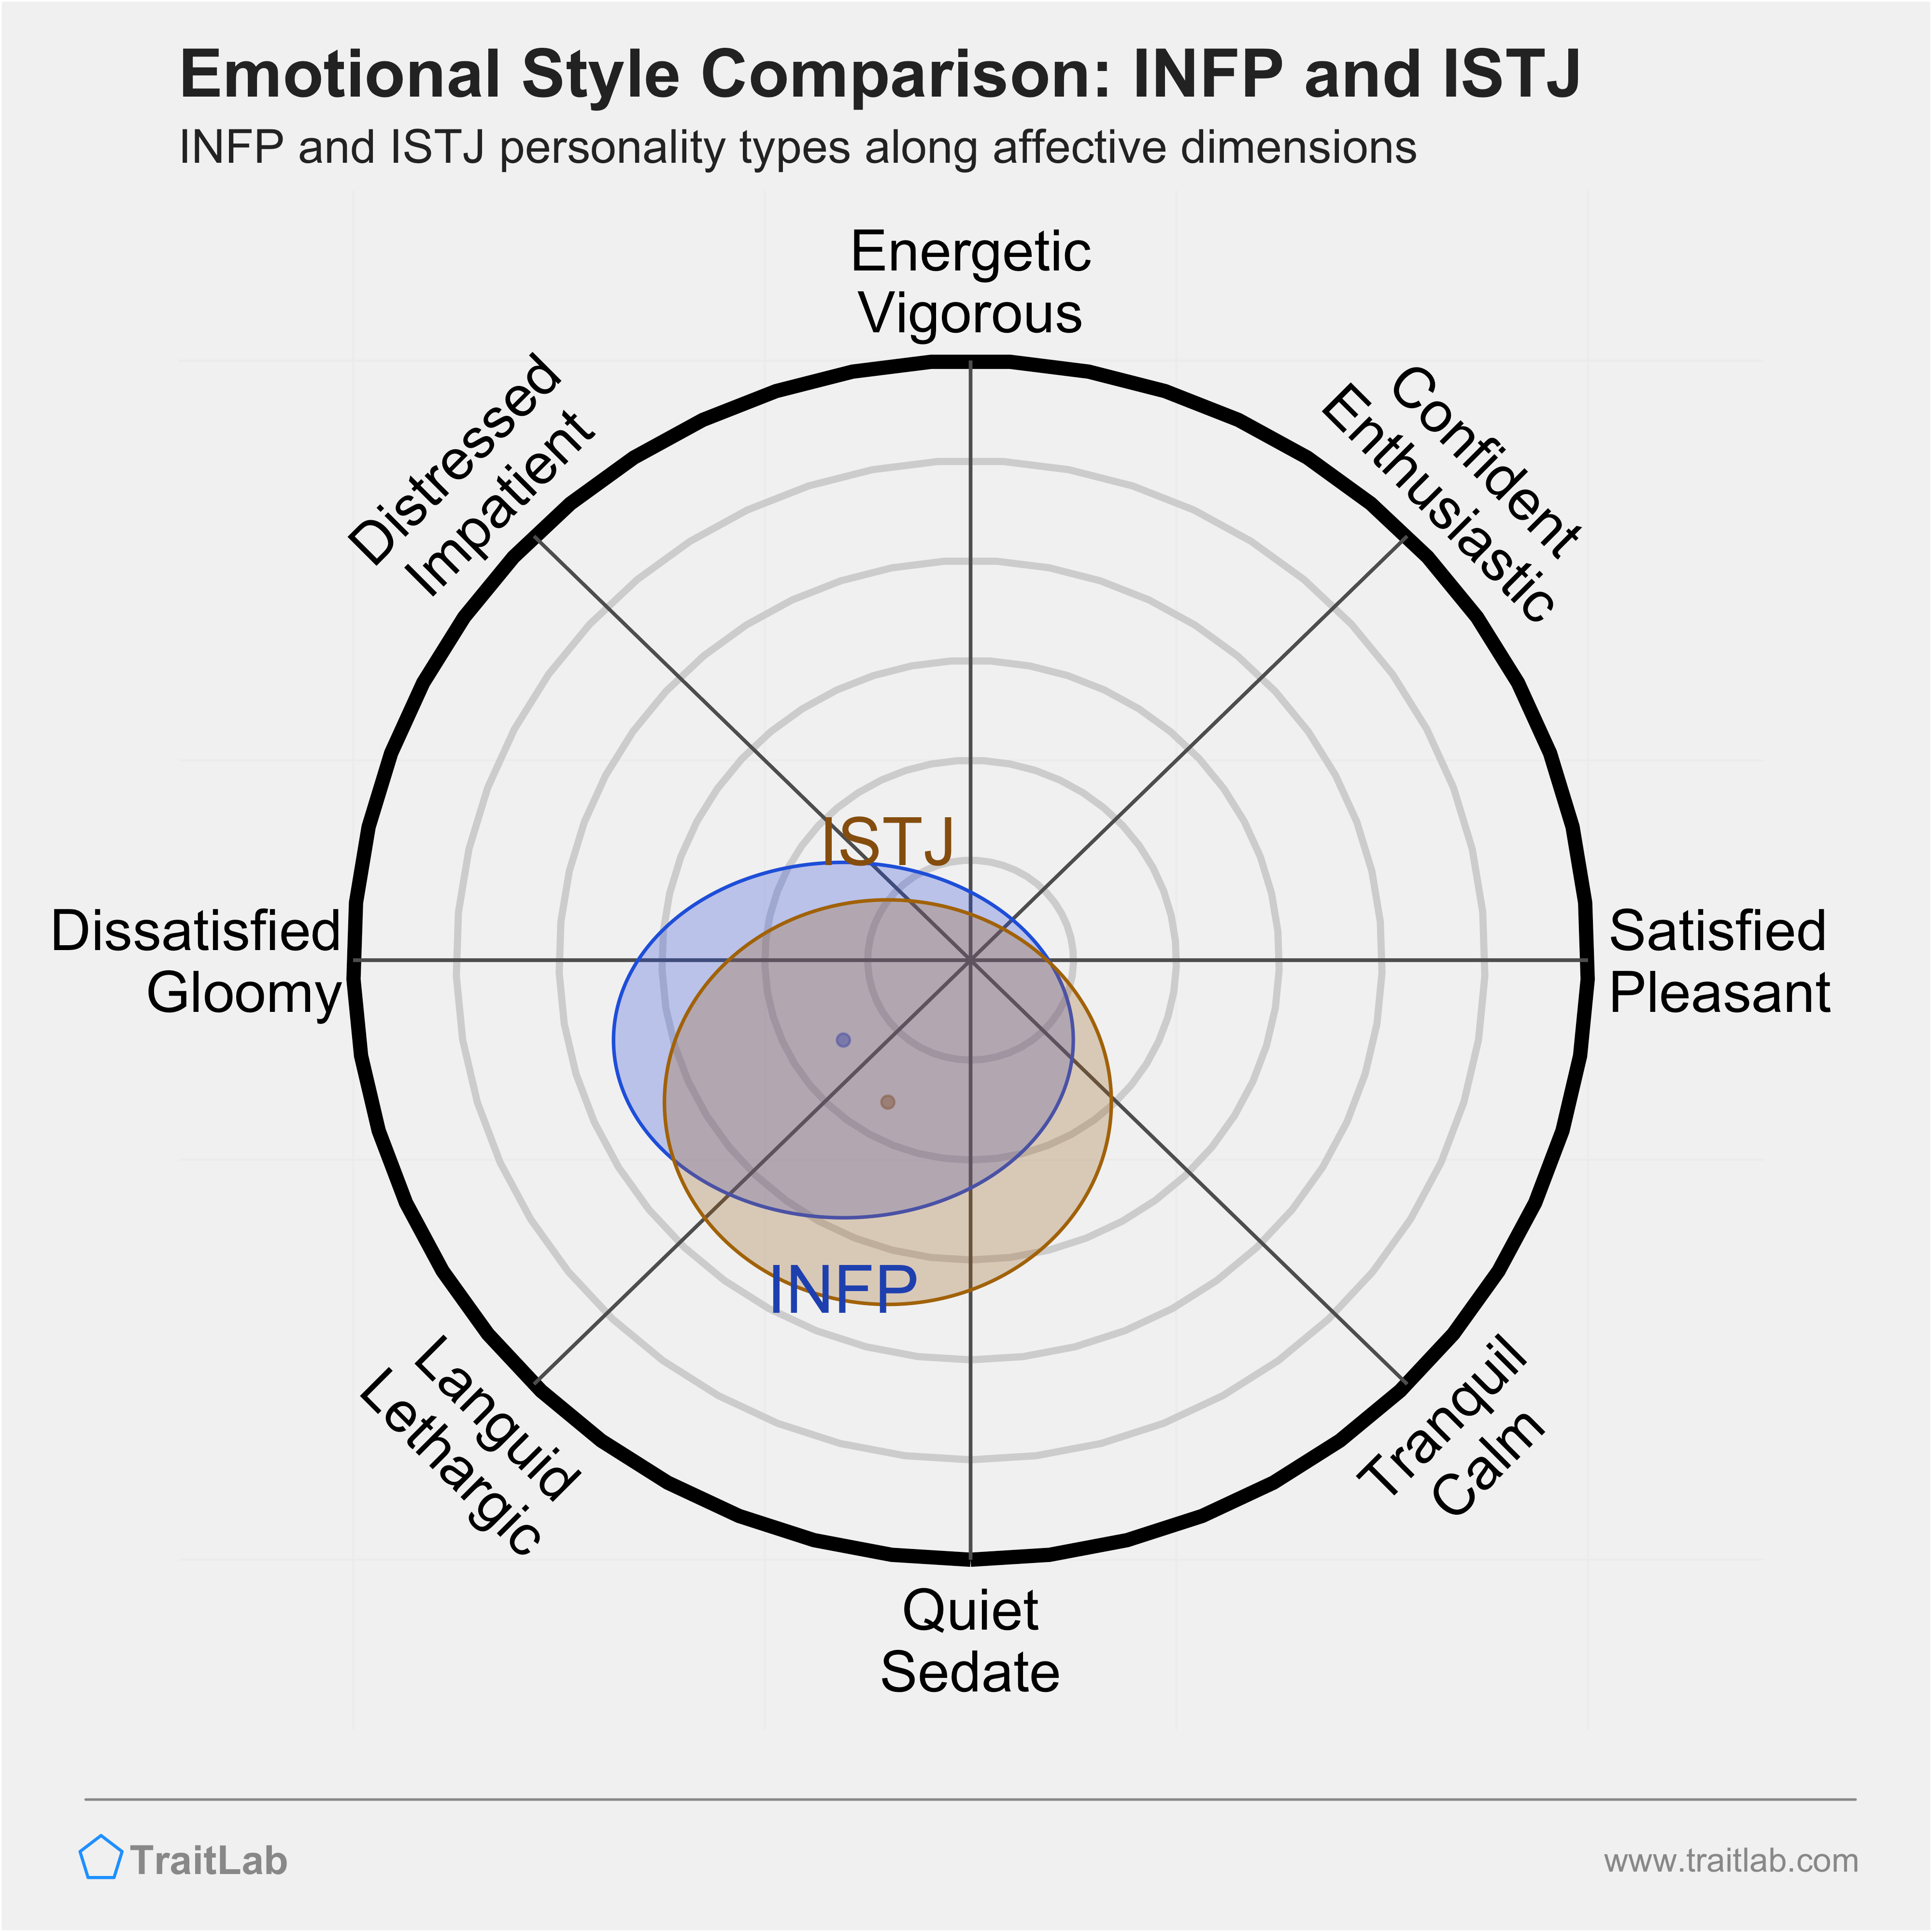 INFP and ISTJ comparison across emotional (affective) dimensions